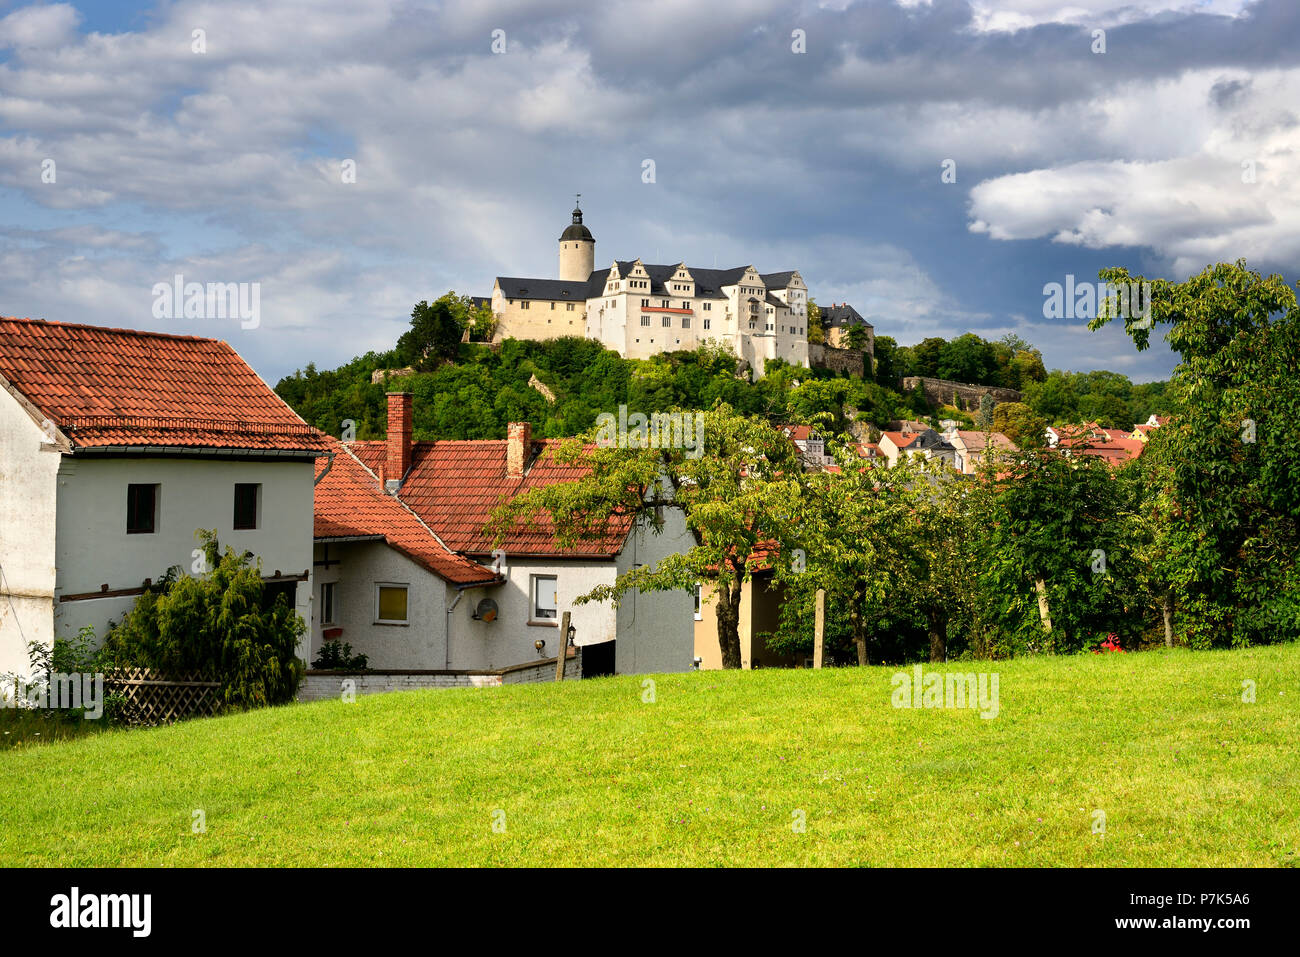 Germany, Thuringia, Ranis, castle and town Stock Photo